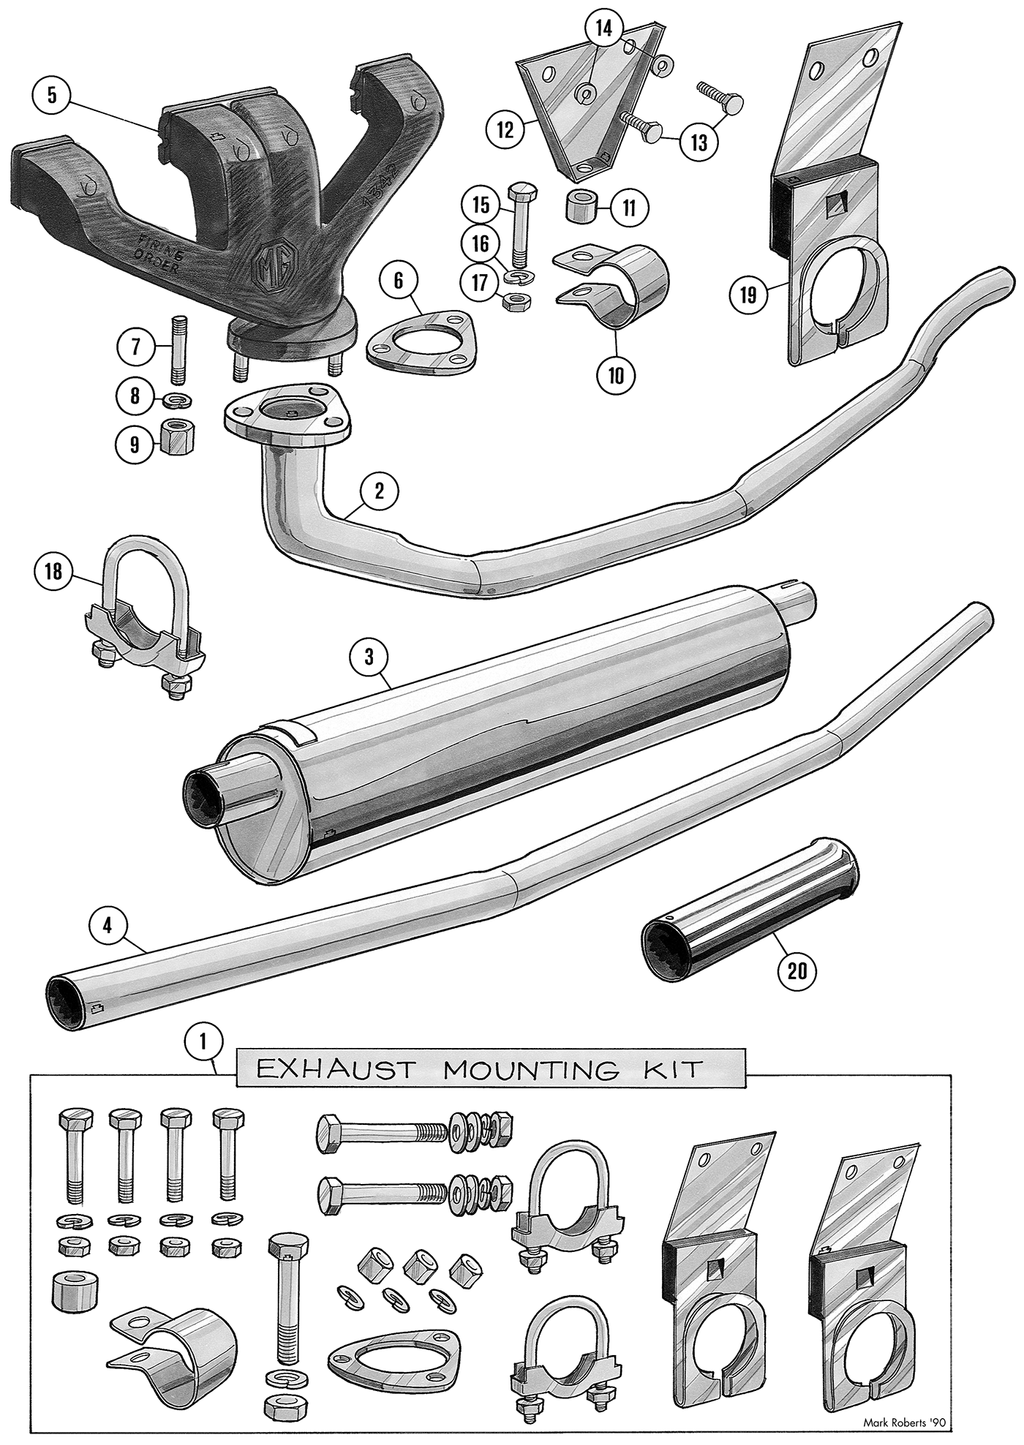 MGTD-TF 1949-1955 - Mufflers/silencers | Webshop Anglo Parts - Exhaust system - 1